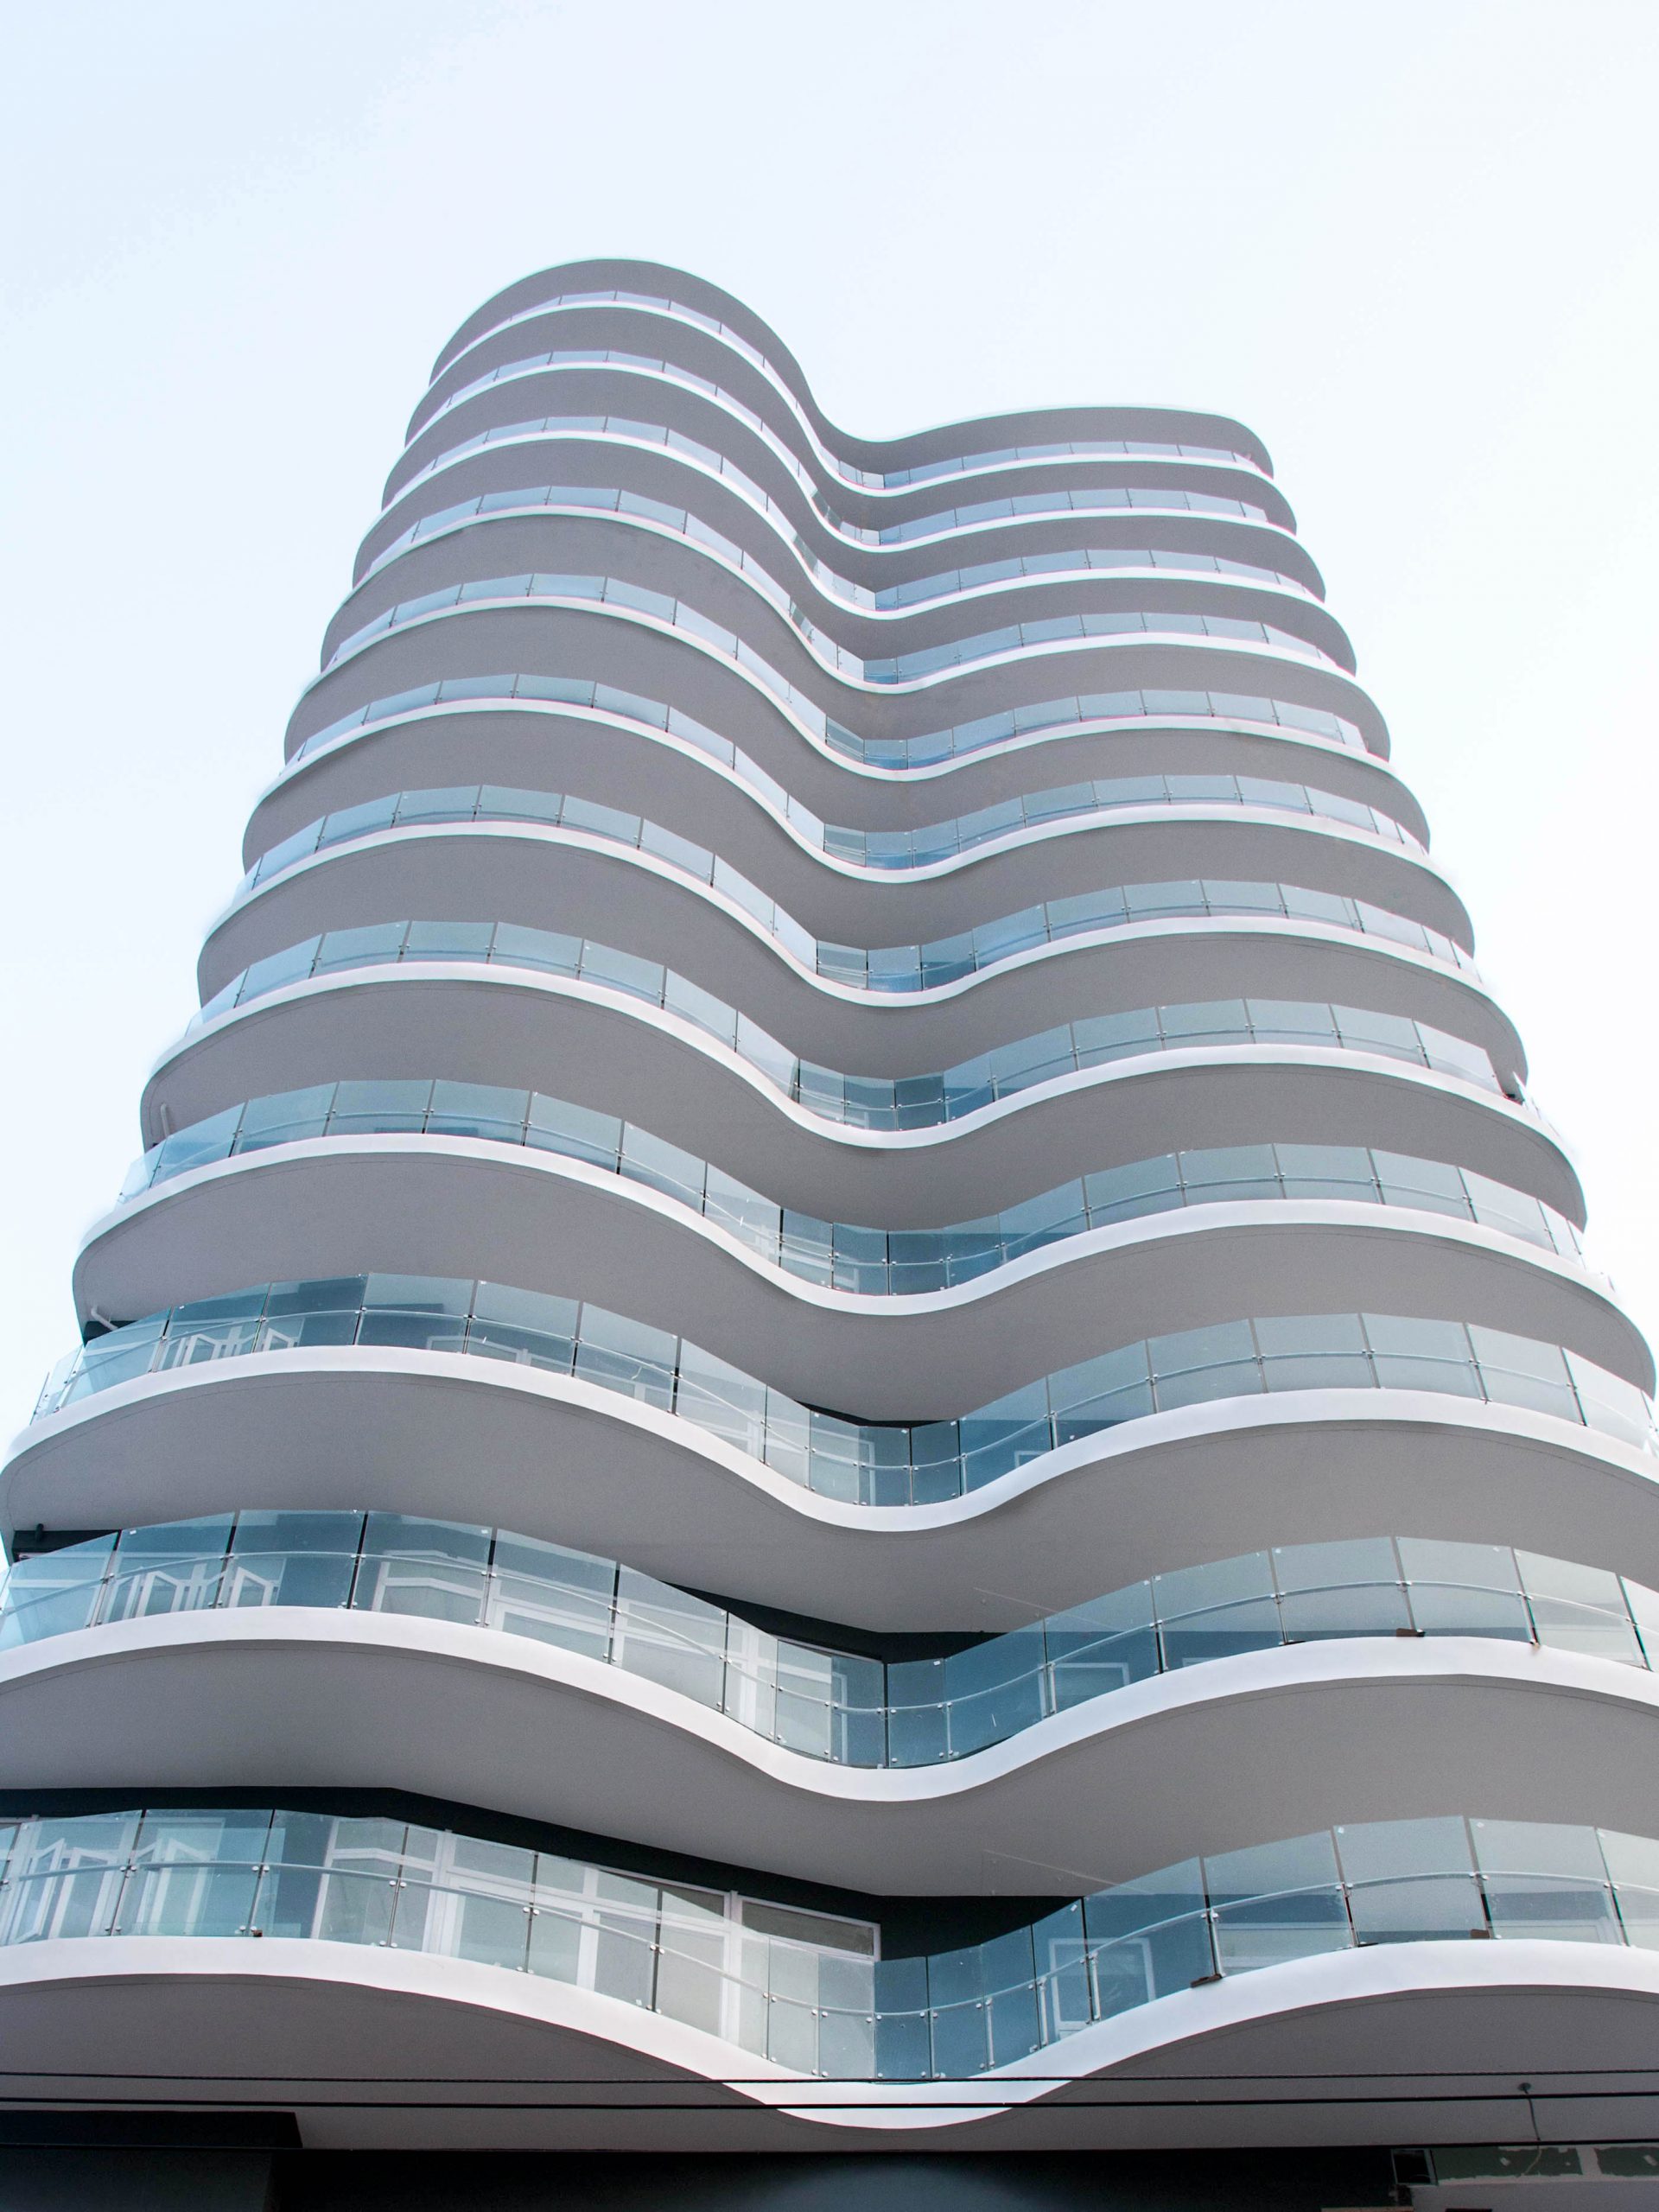 Twelve Luxury Flats featuring a curved facade that creates a soft iconic addition to the San Juan Skyline